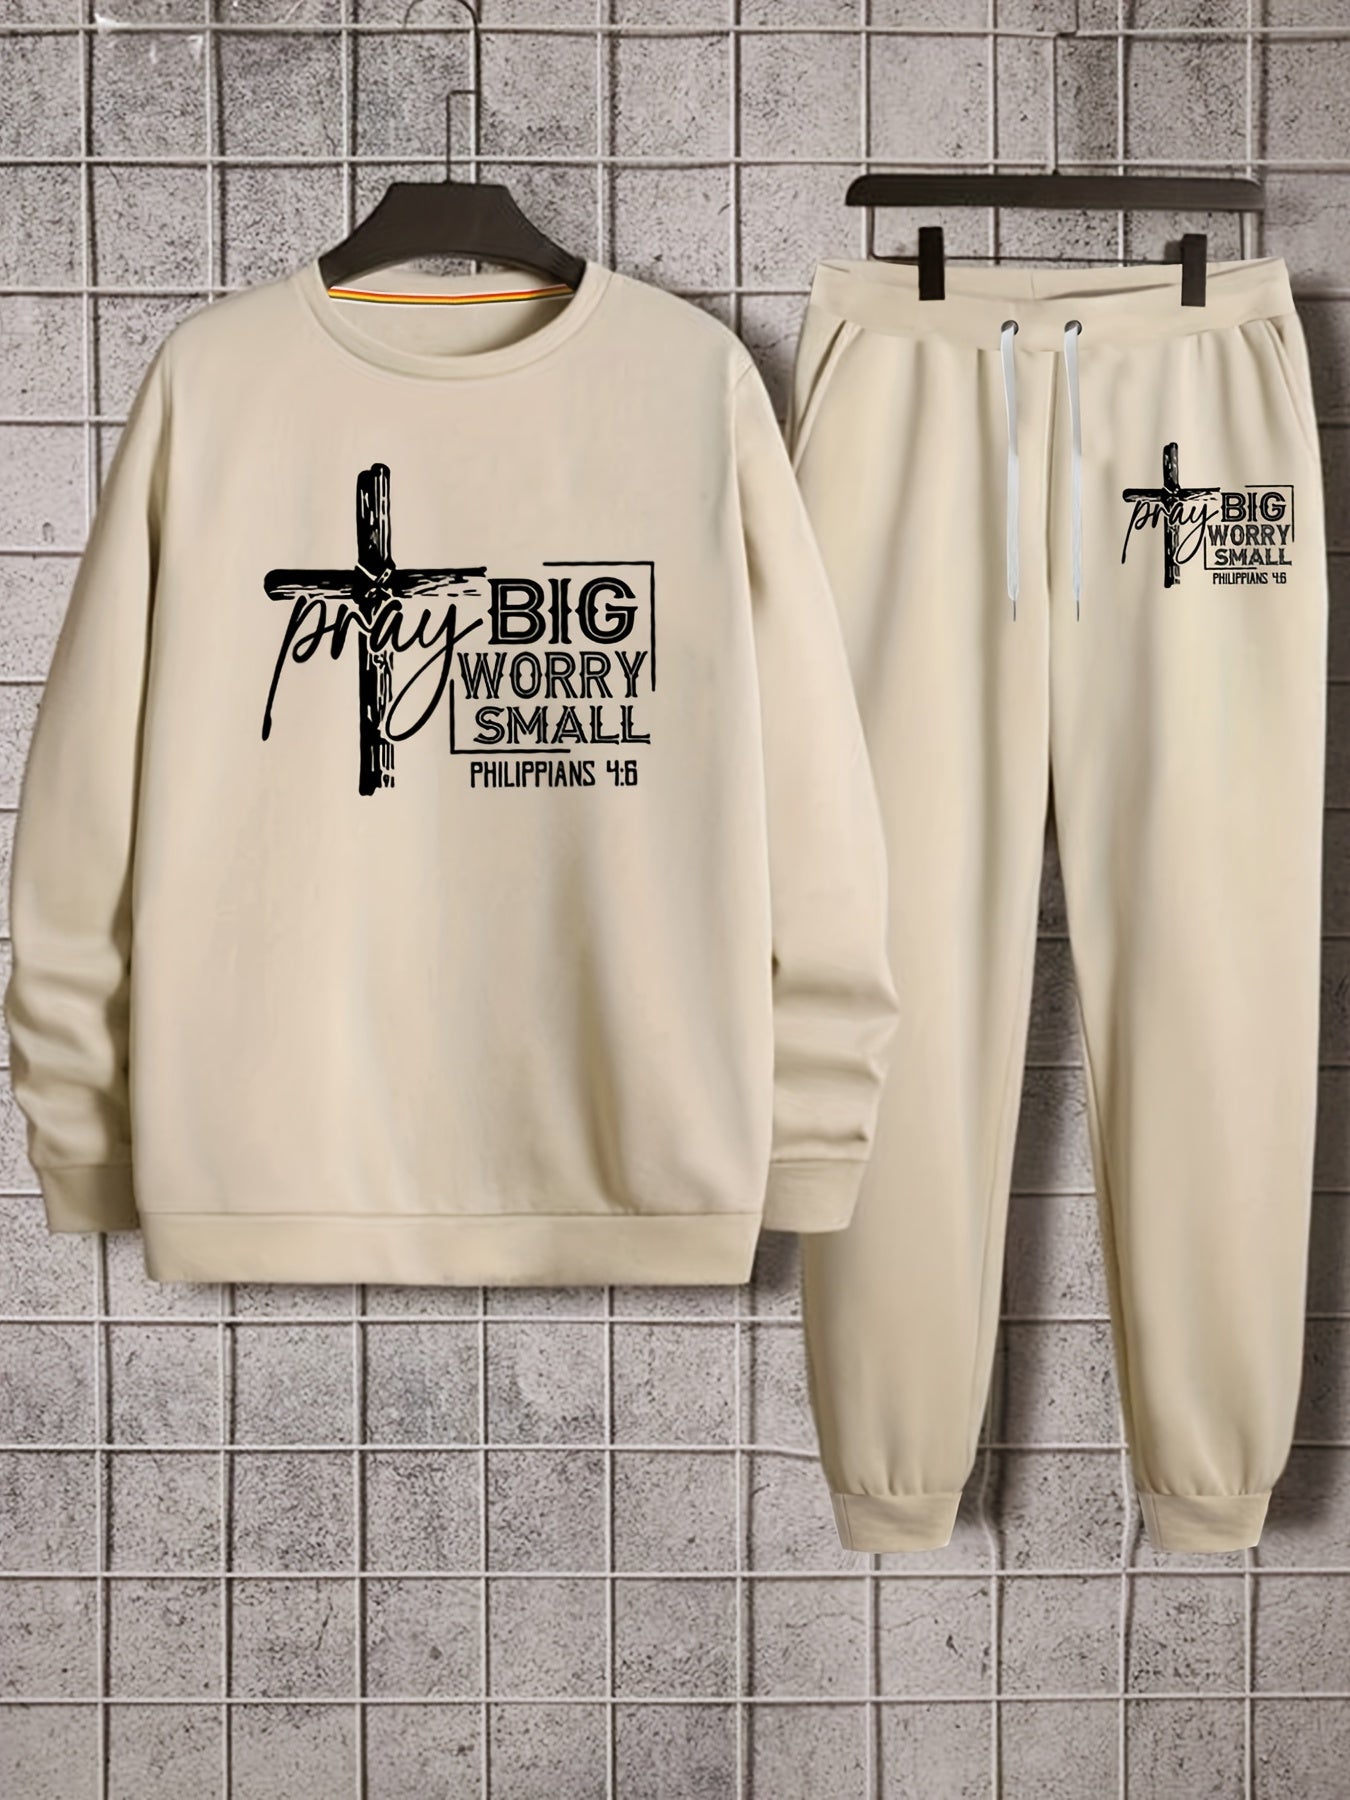 Pray Big Worry Small Men's Christian Casual Outfit claimedbygoddesigns